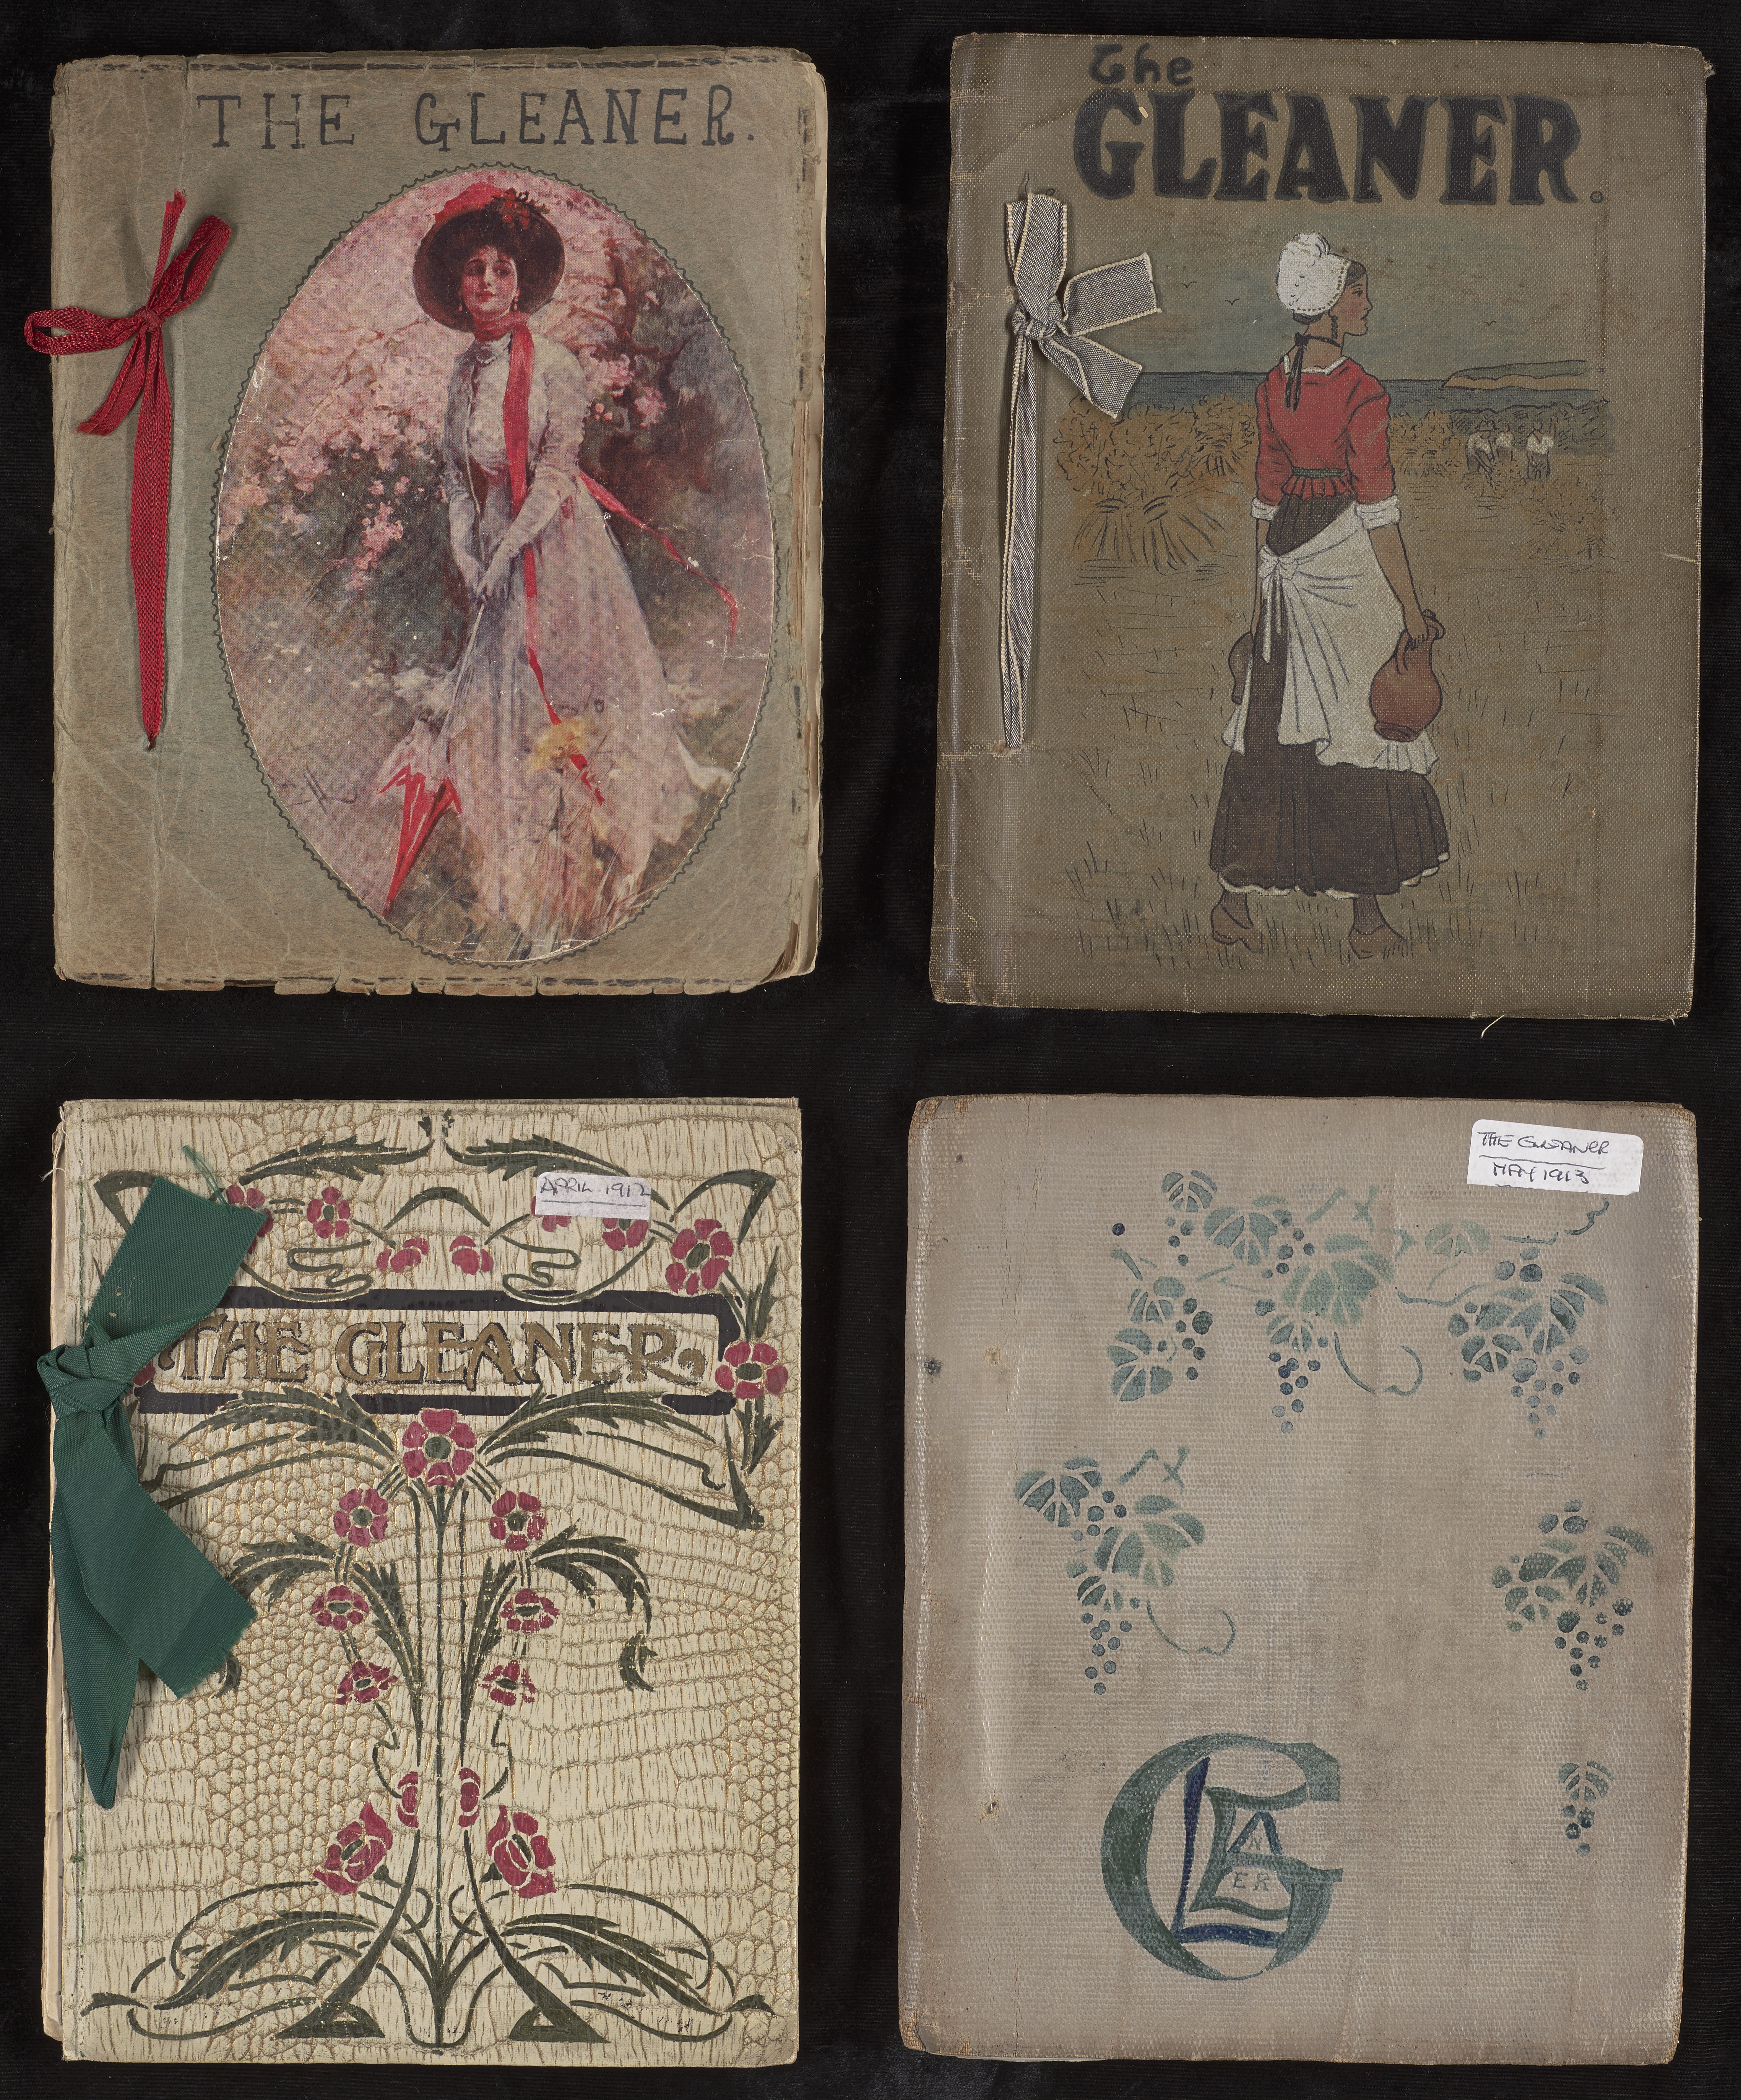 Caption 1: Cover designs for The Gleaner were contributed by members. These four early issues date from 1910-13. (Not yet cataloged, Library Associates Endowment Fund.)